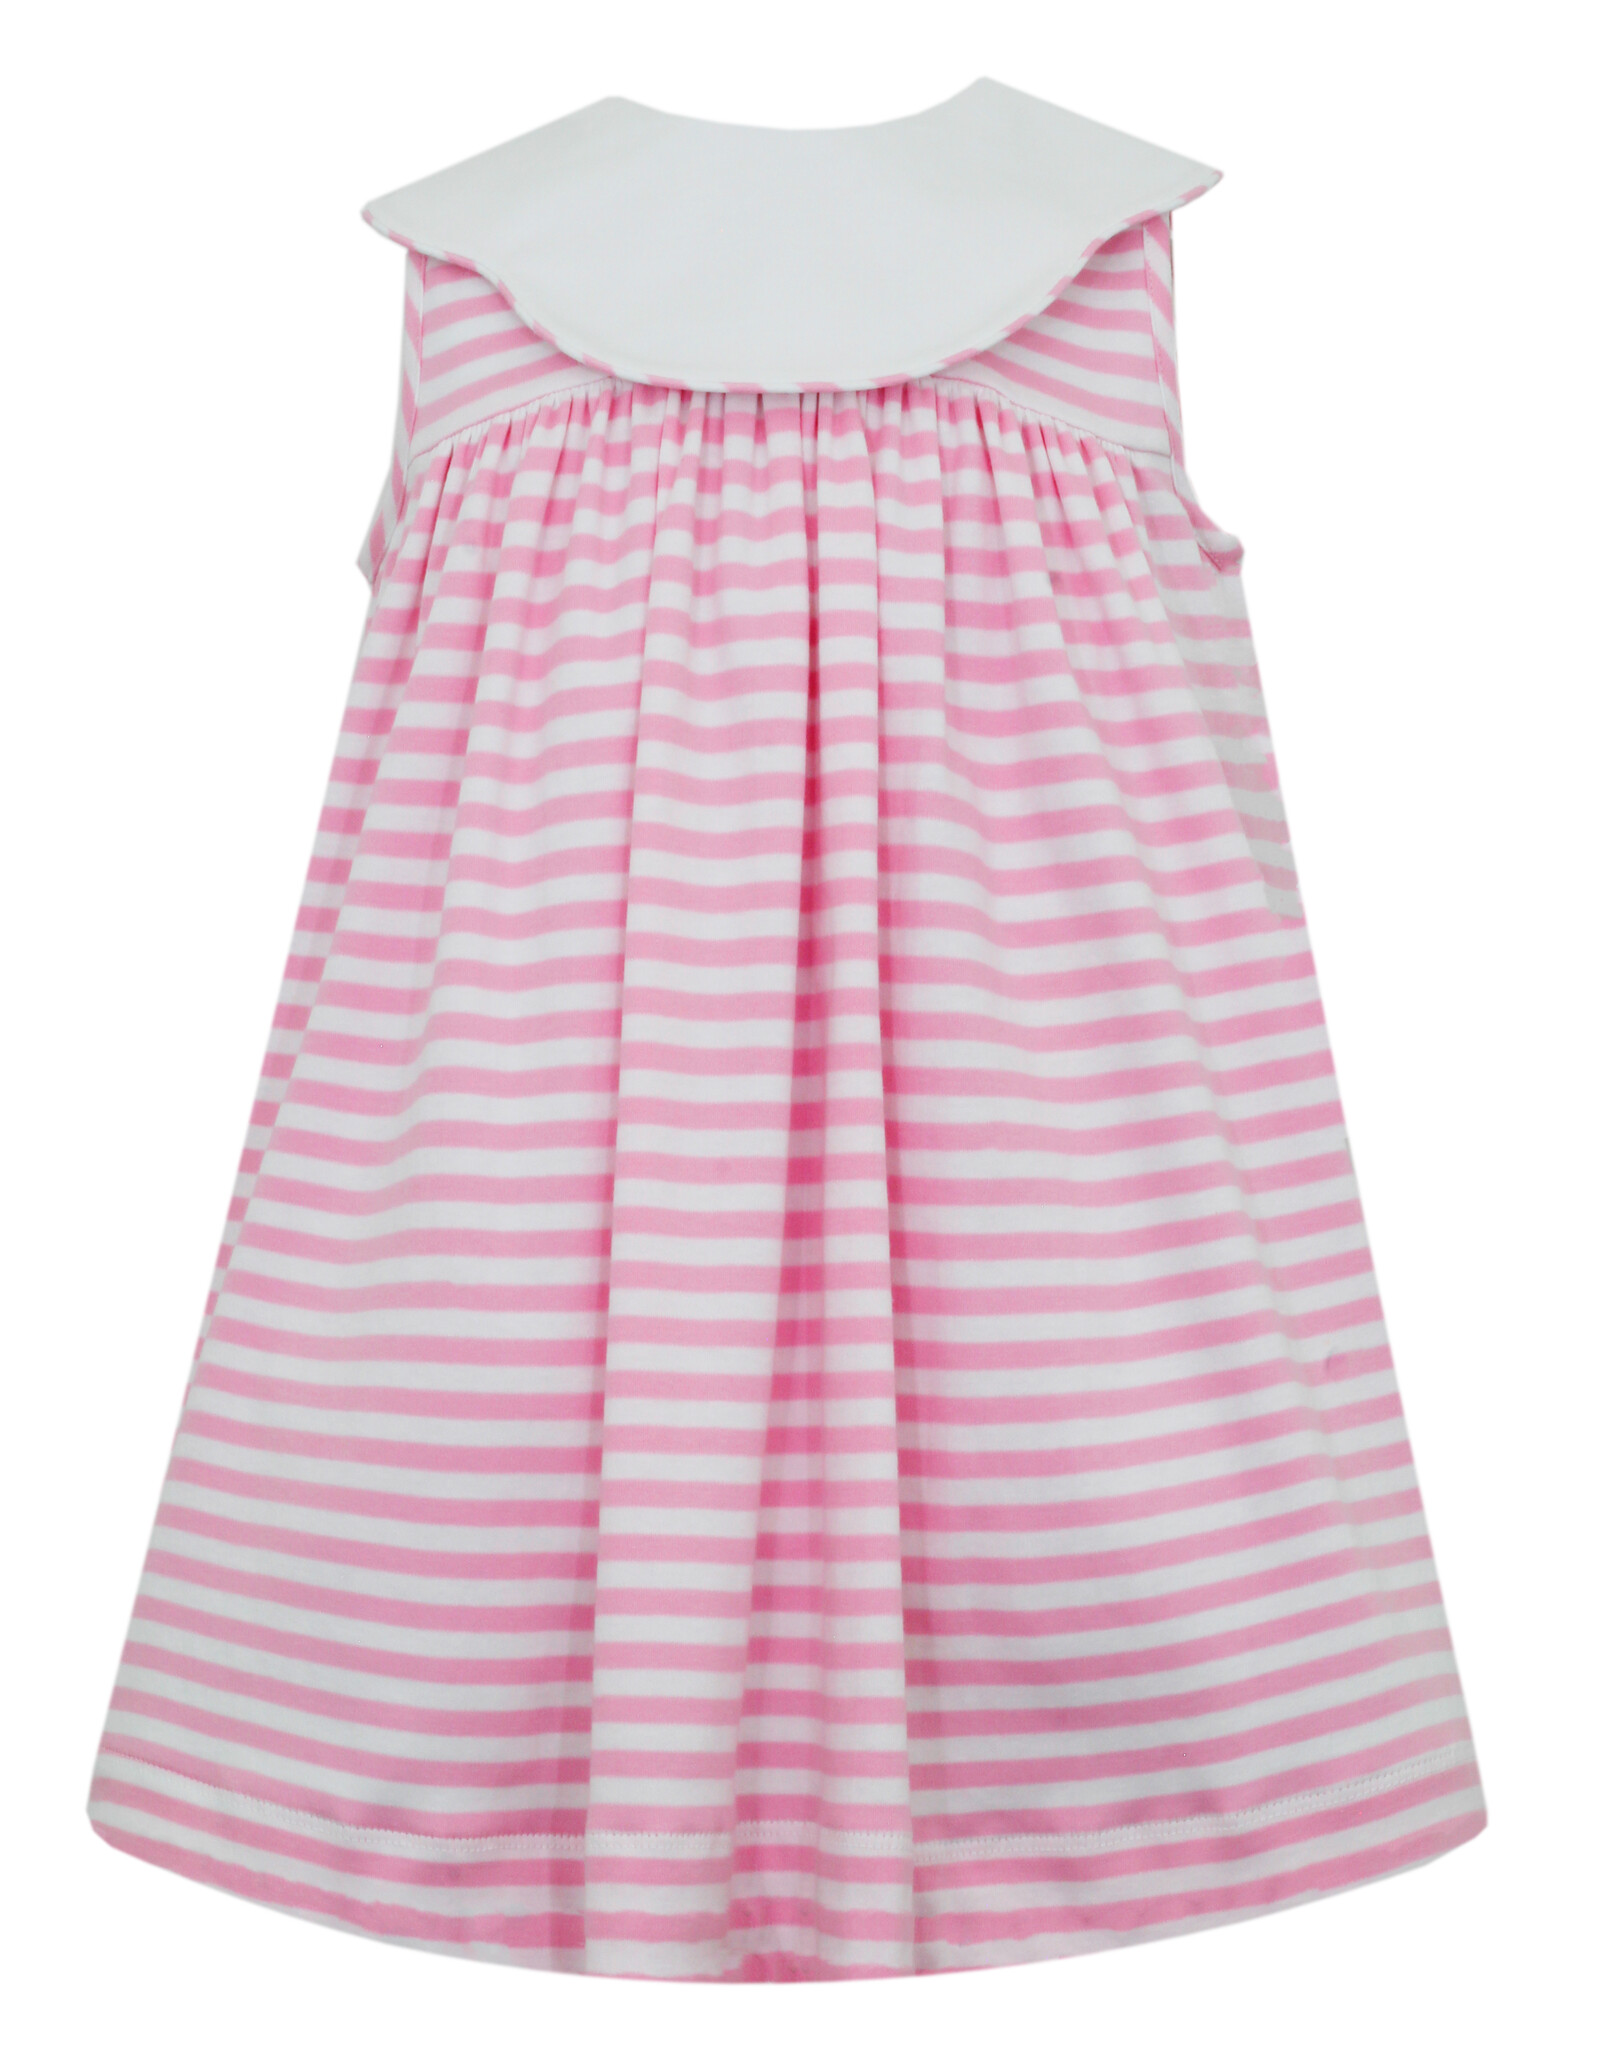 Claire and Charlie Pink Knit Basic Sleeveless Dress